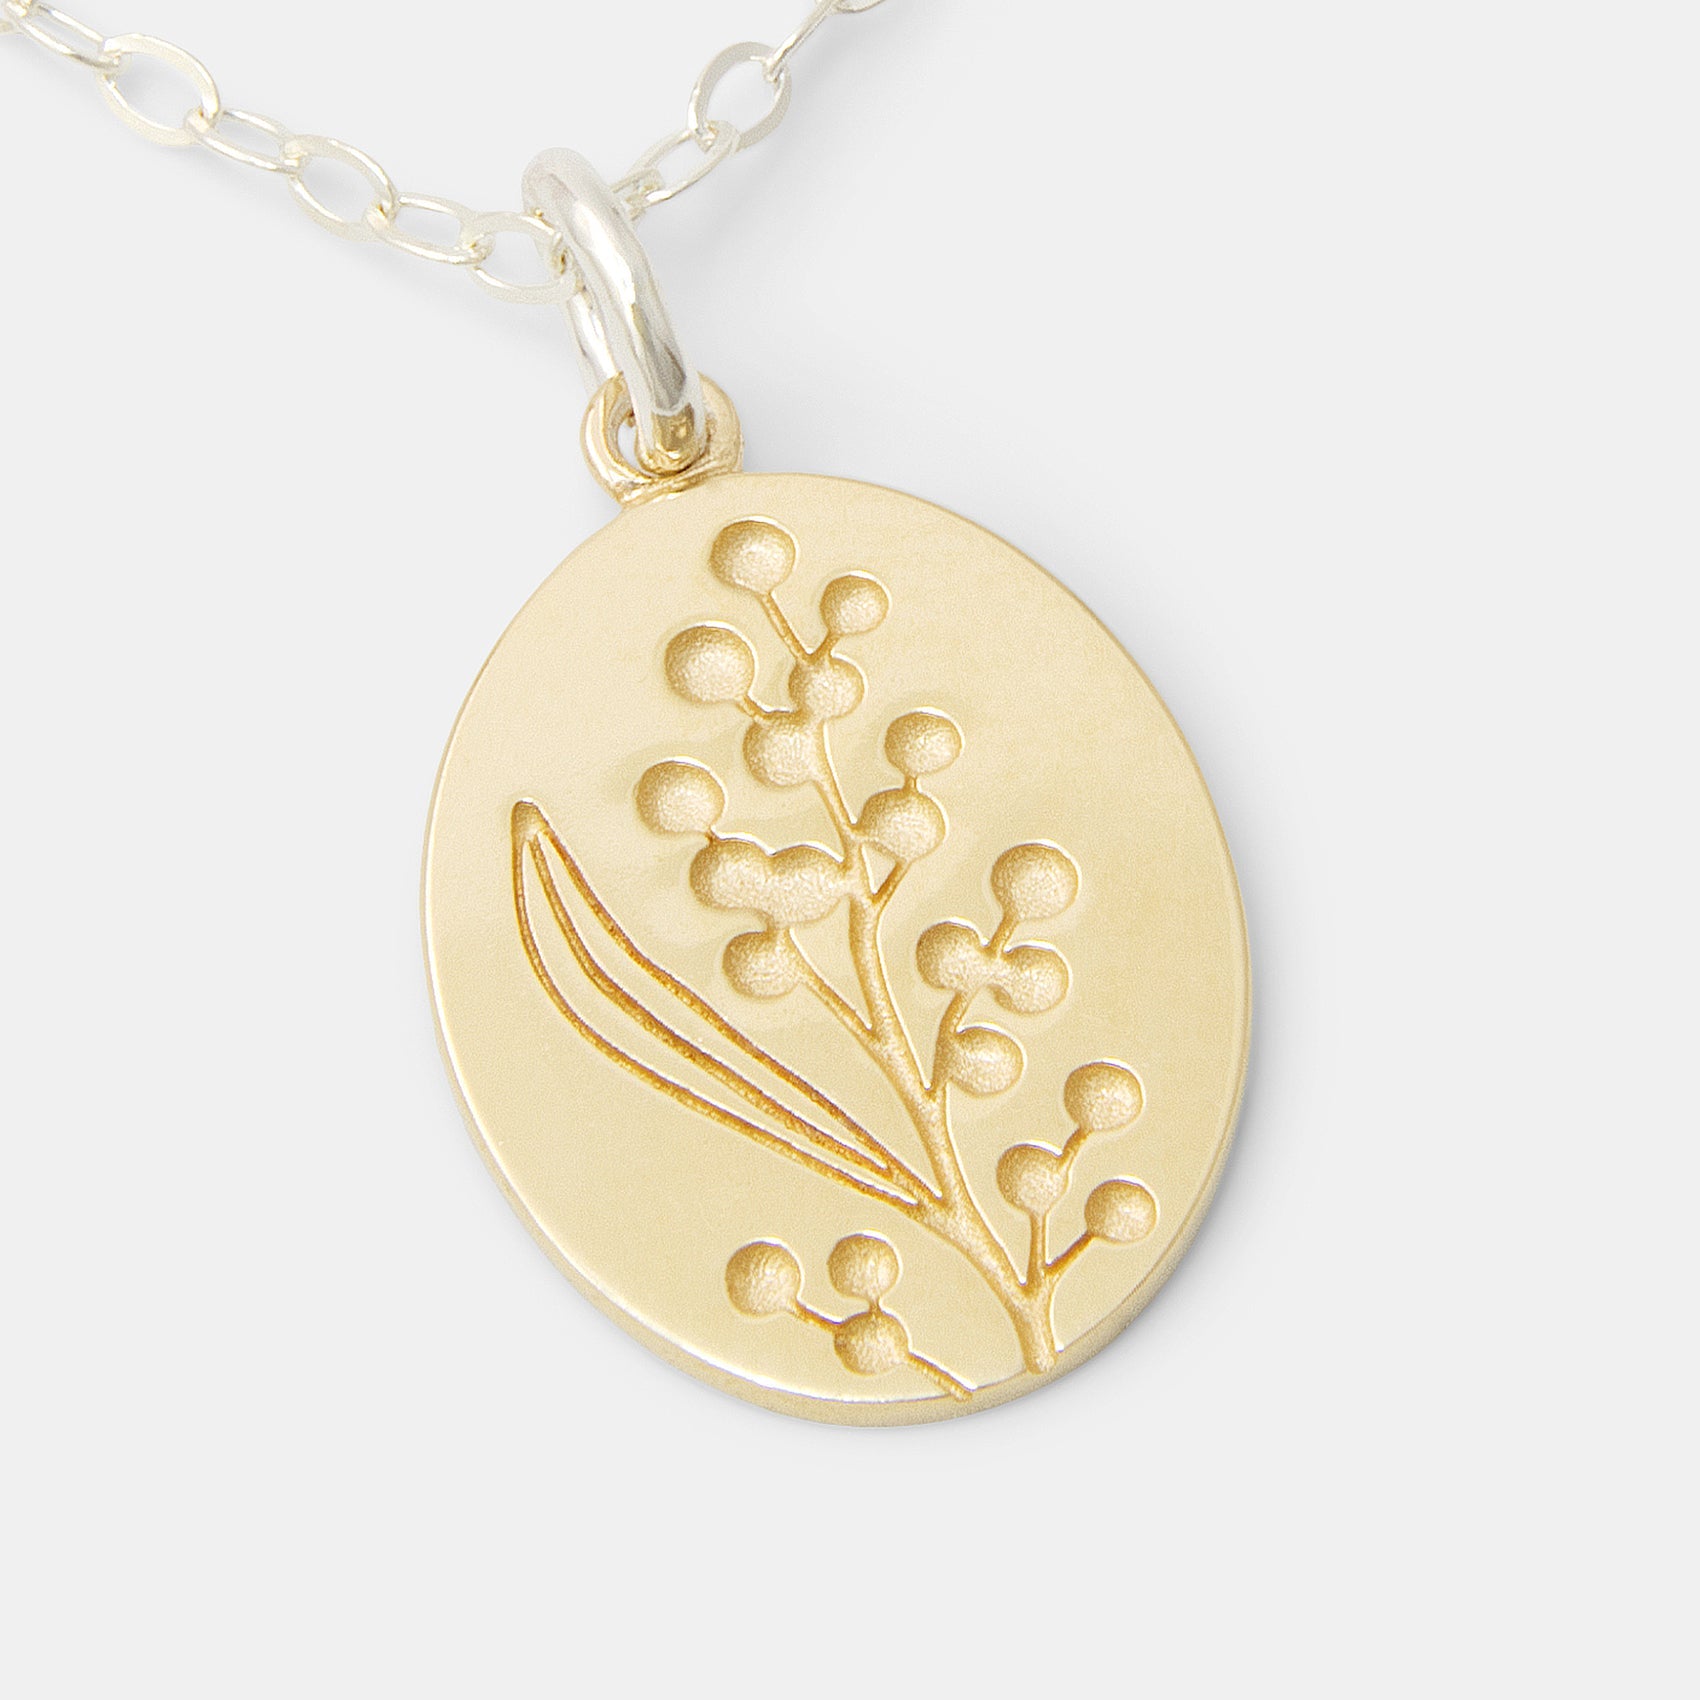 Wattle Solid Gold Pendant on Silver Necklace - Simone Walsh Jewellery Australia